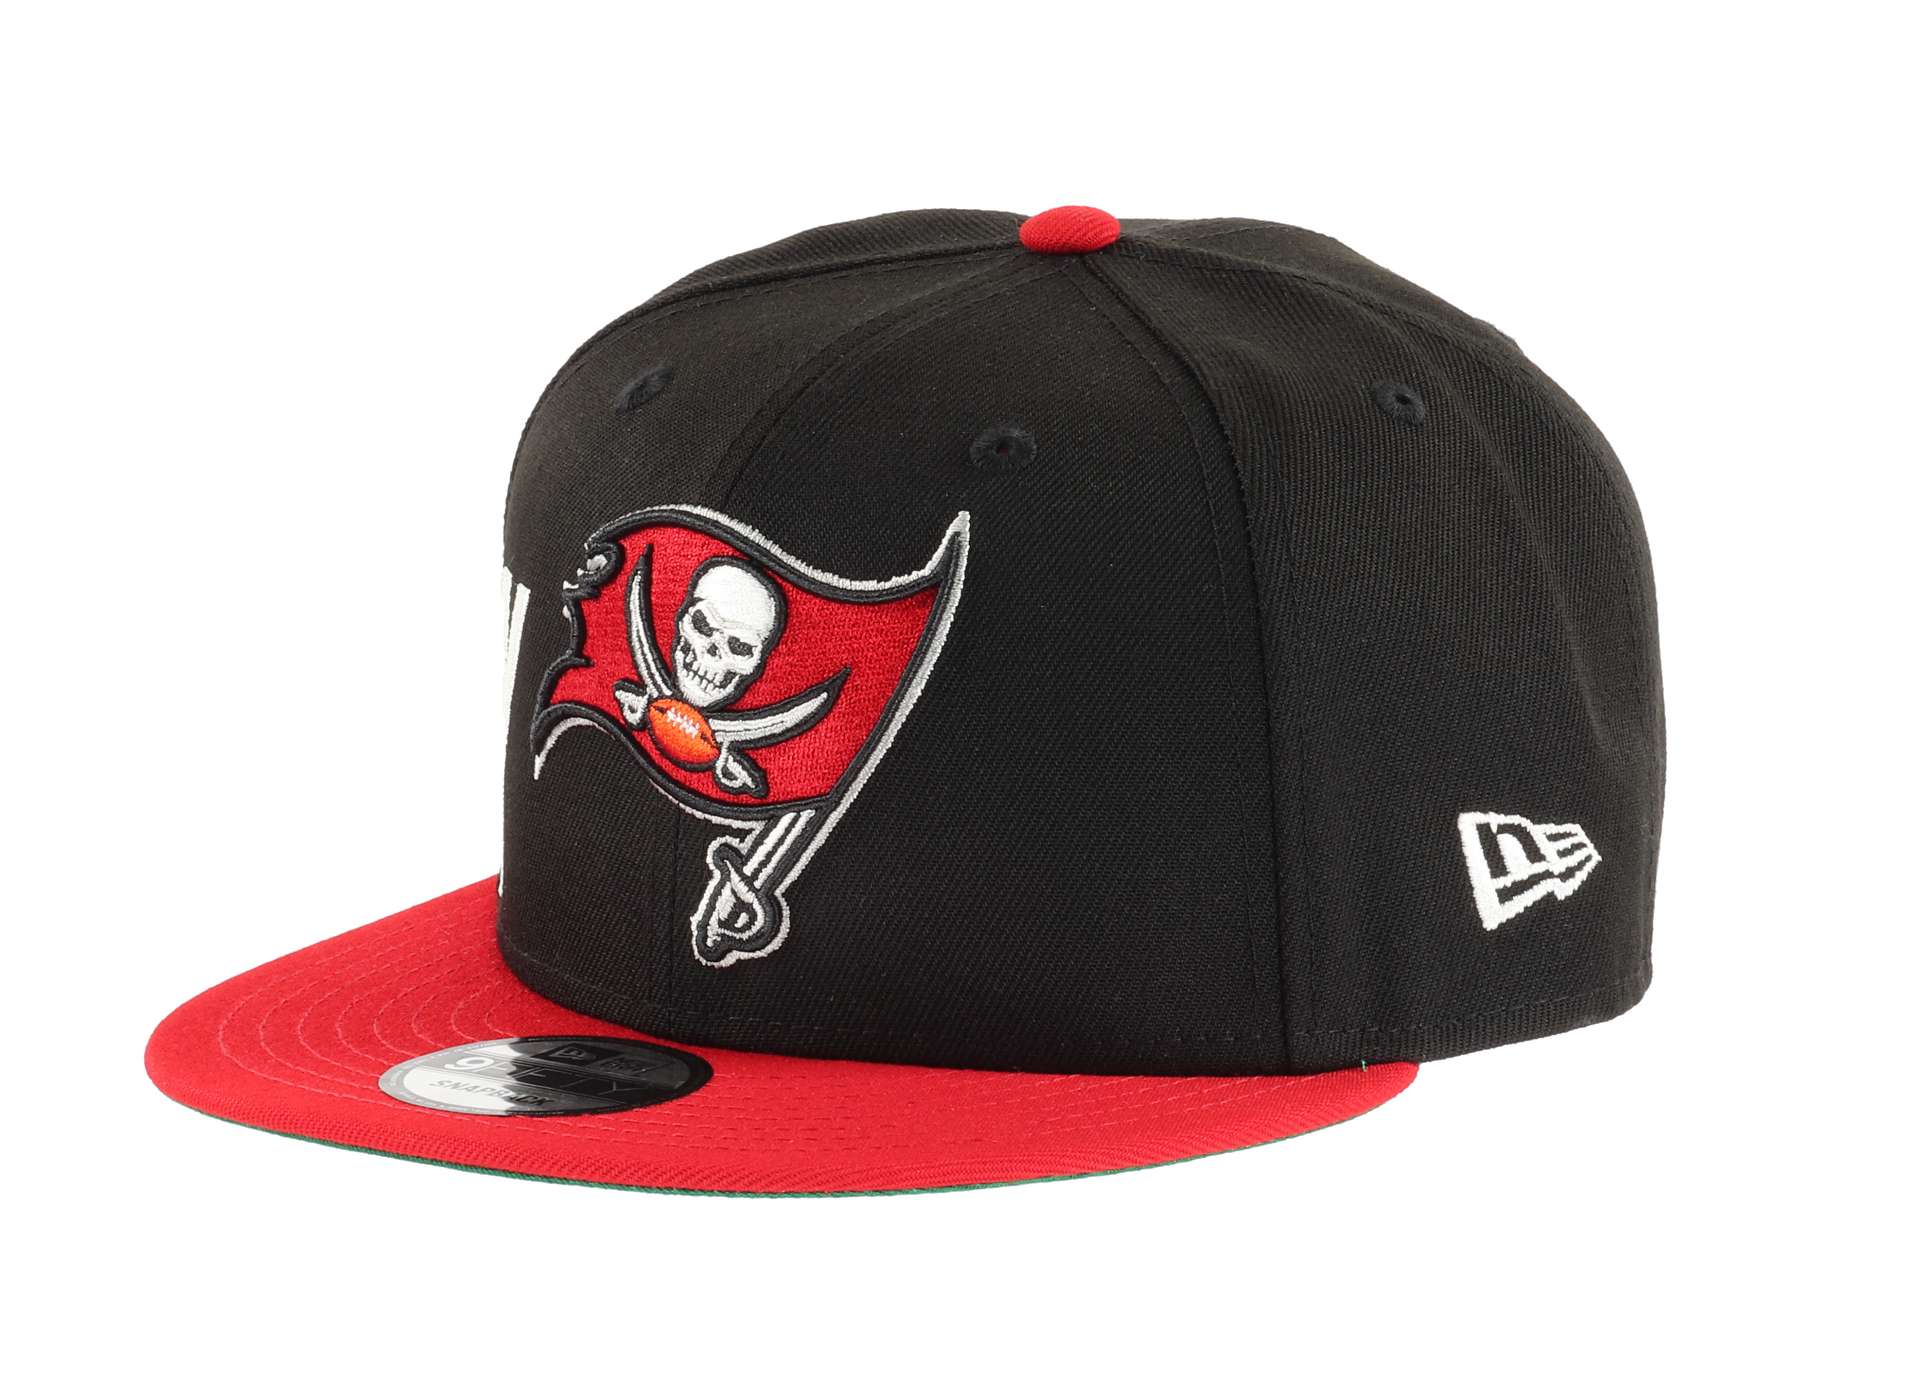 Tampa Bay Buccaneers Sidefont Black / Red 9Fifty Snapback Cap New Era